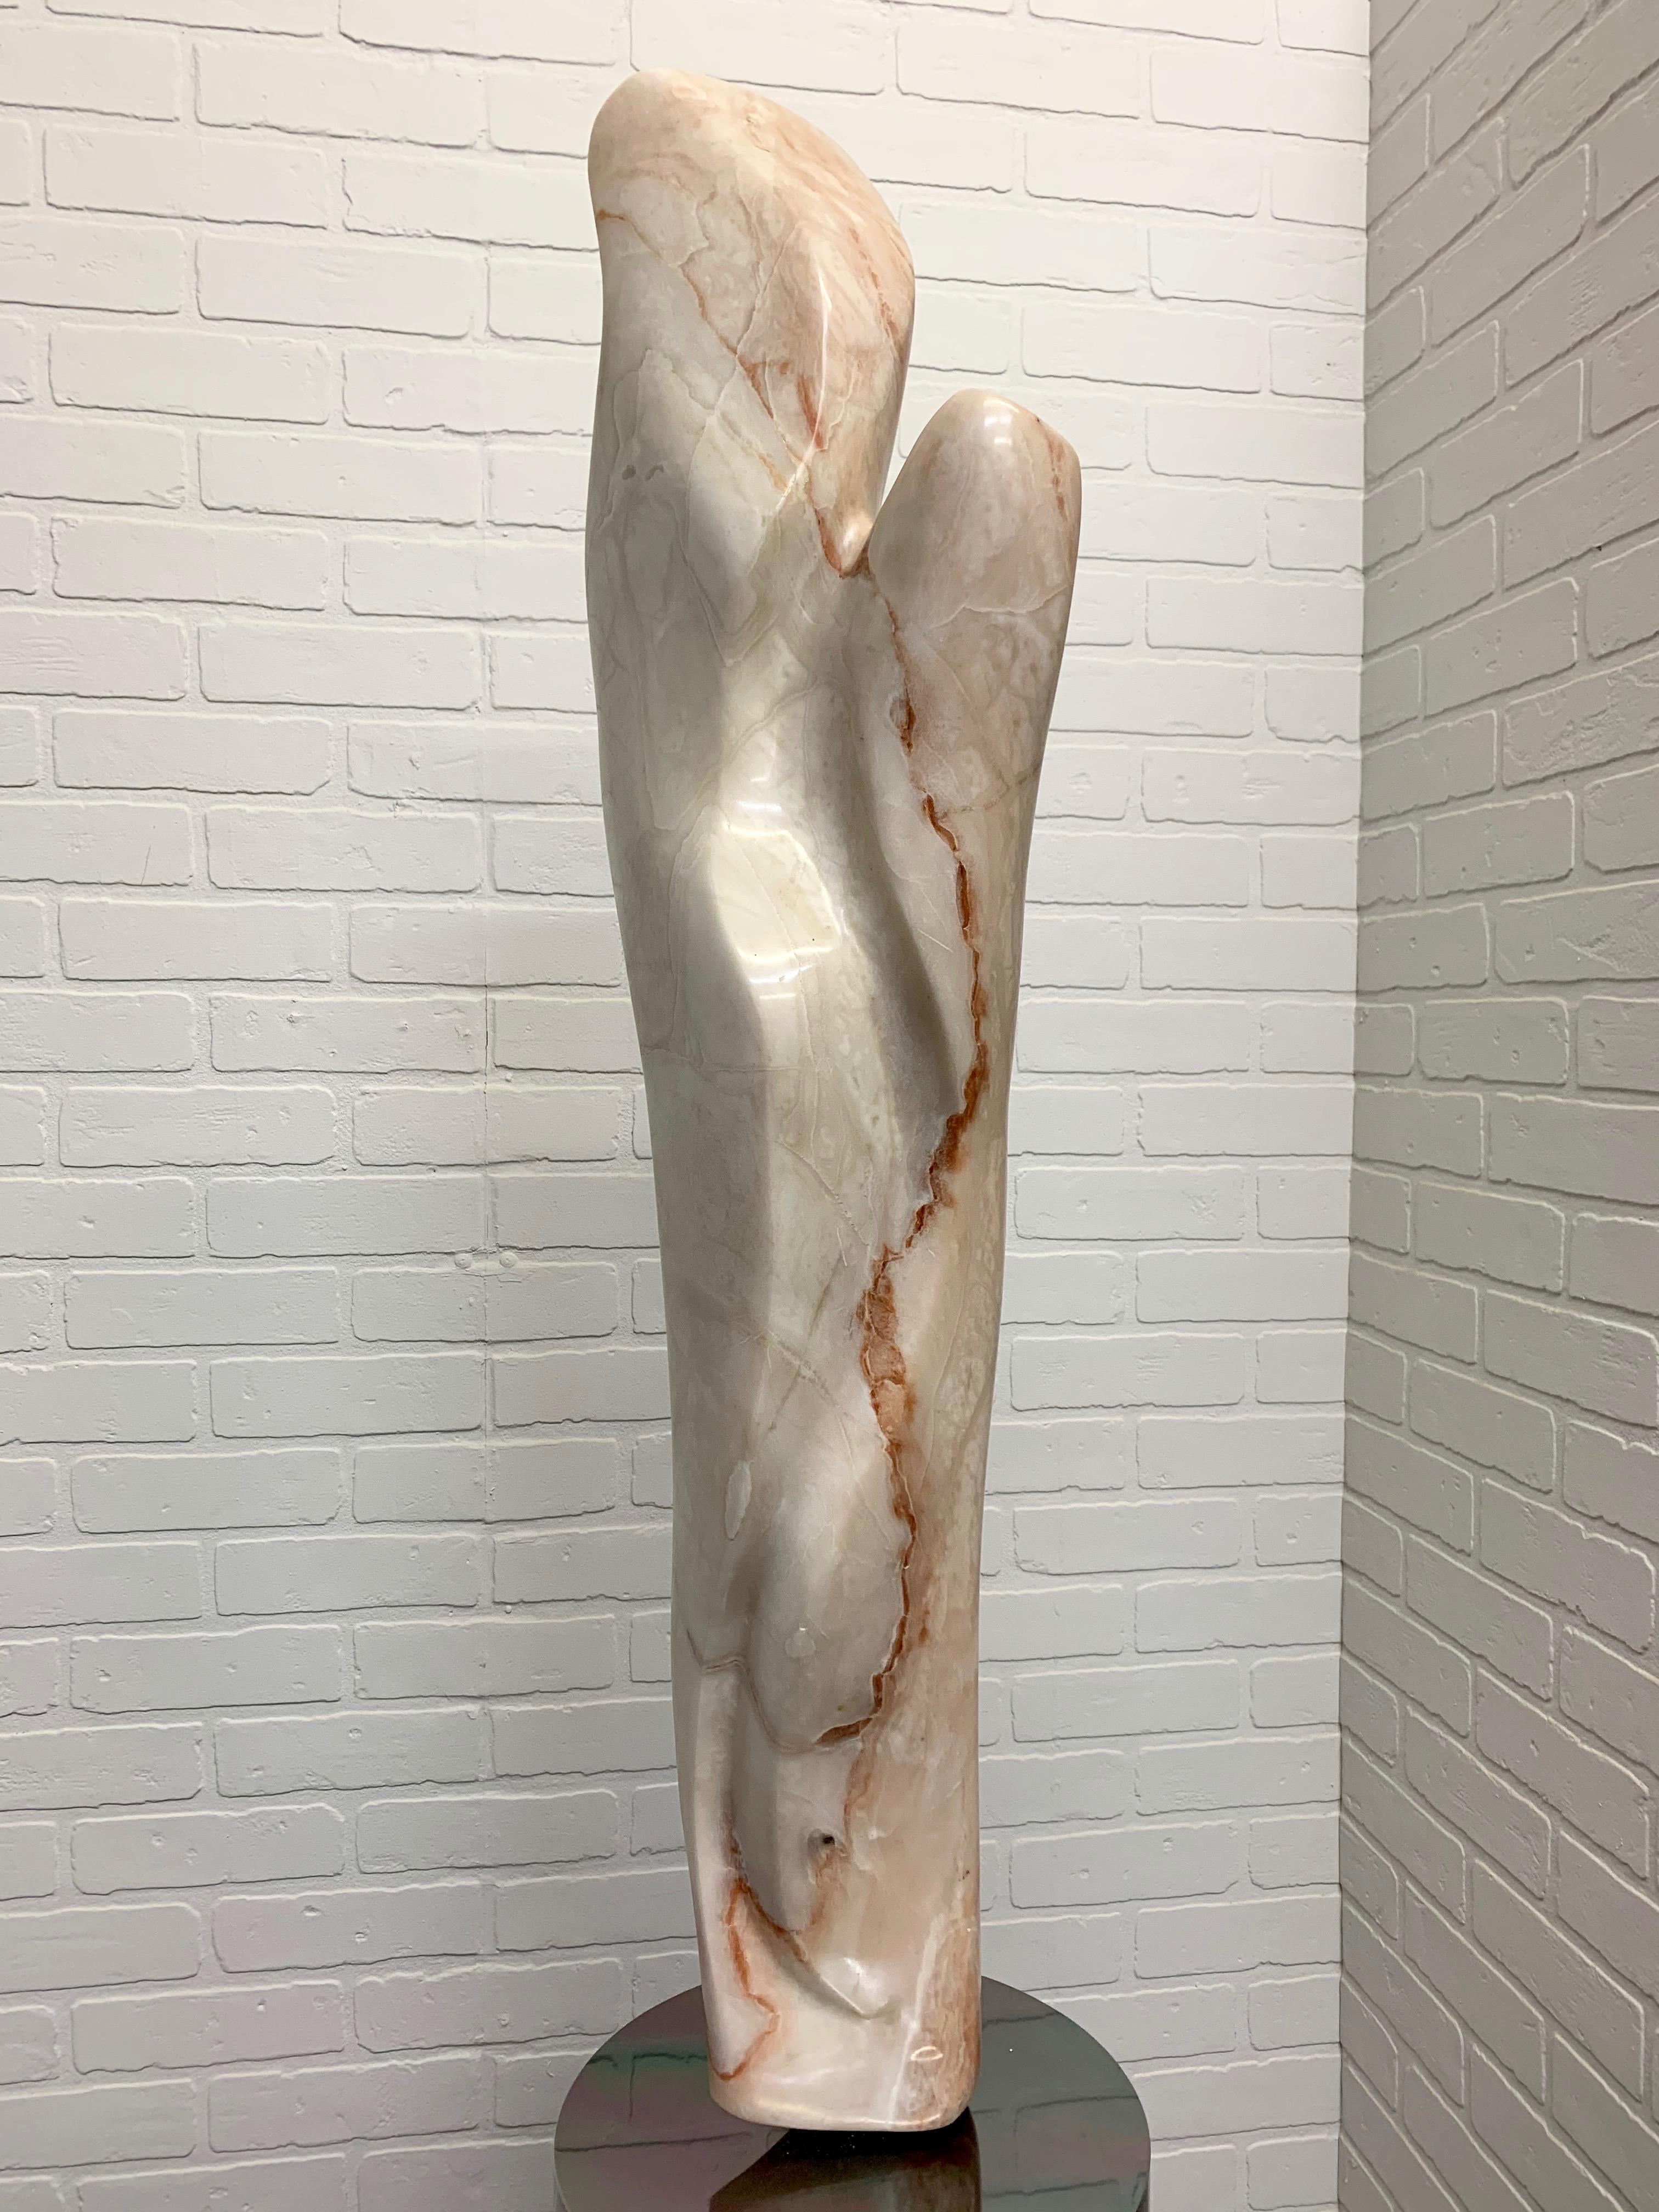 Stainless Steel Marble Sculpture Titled 